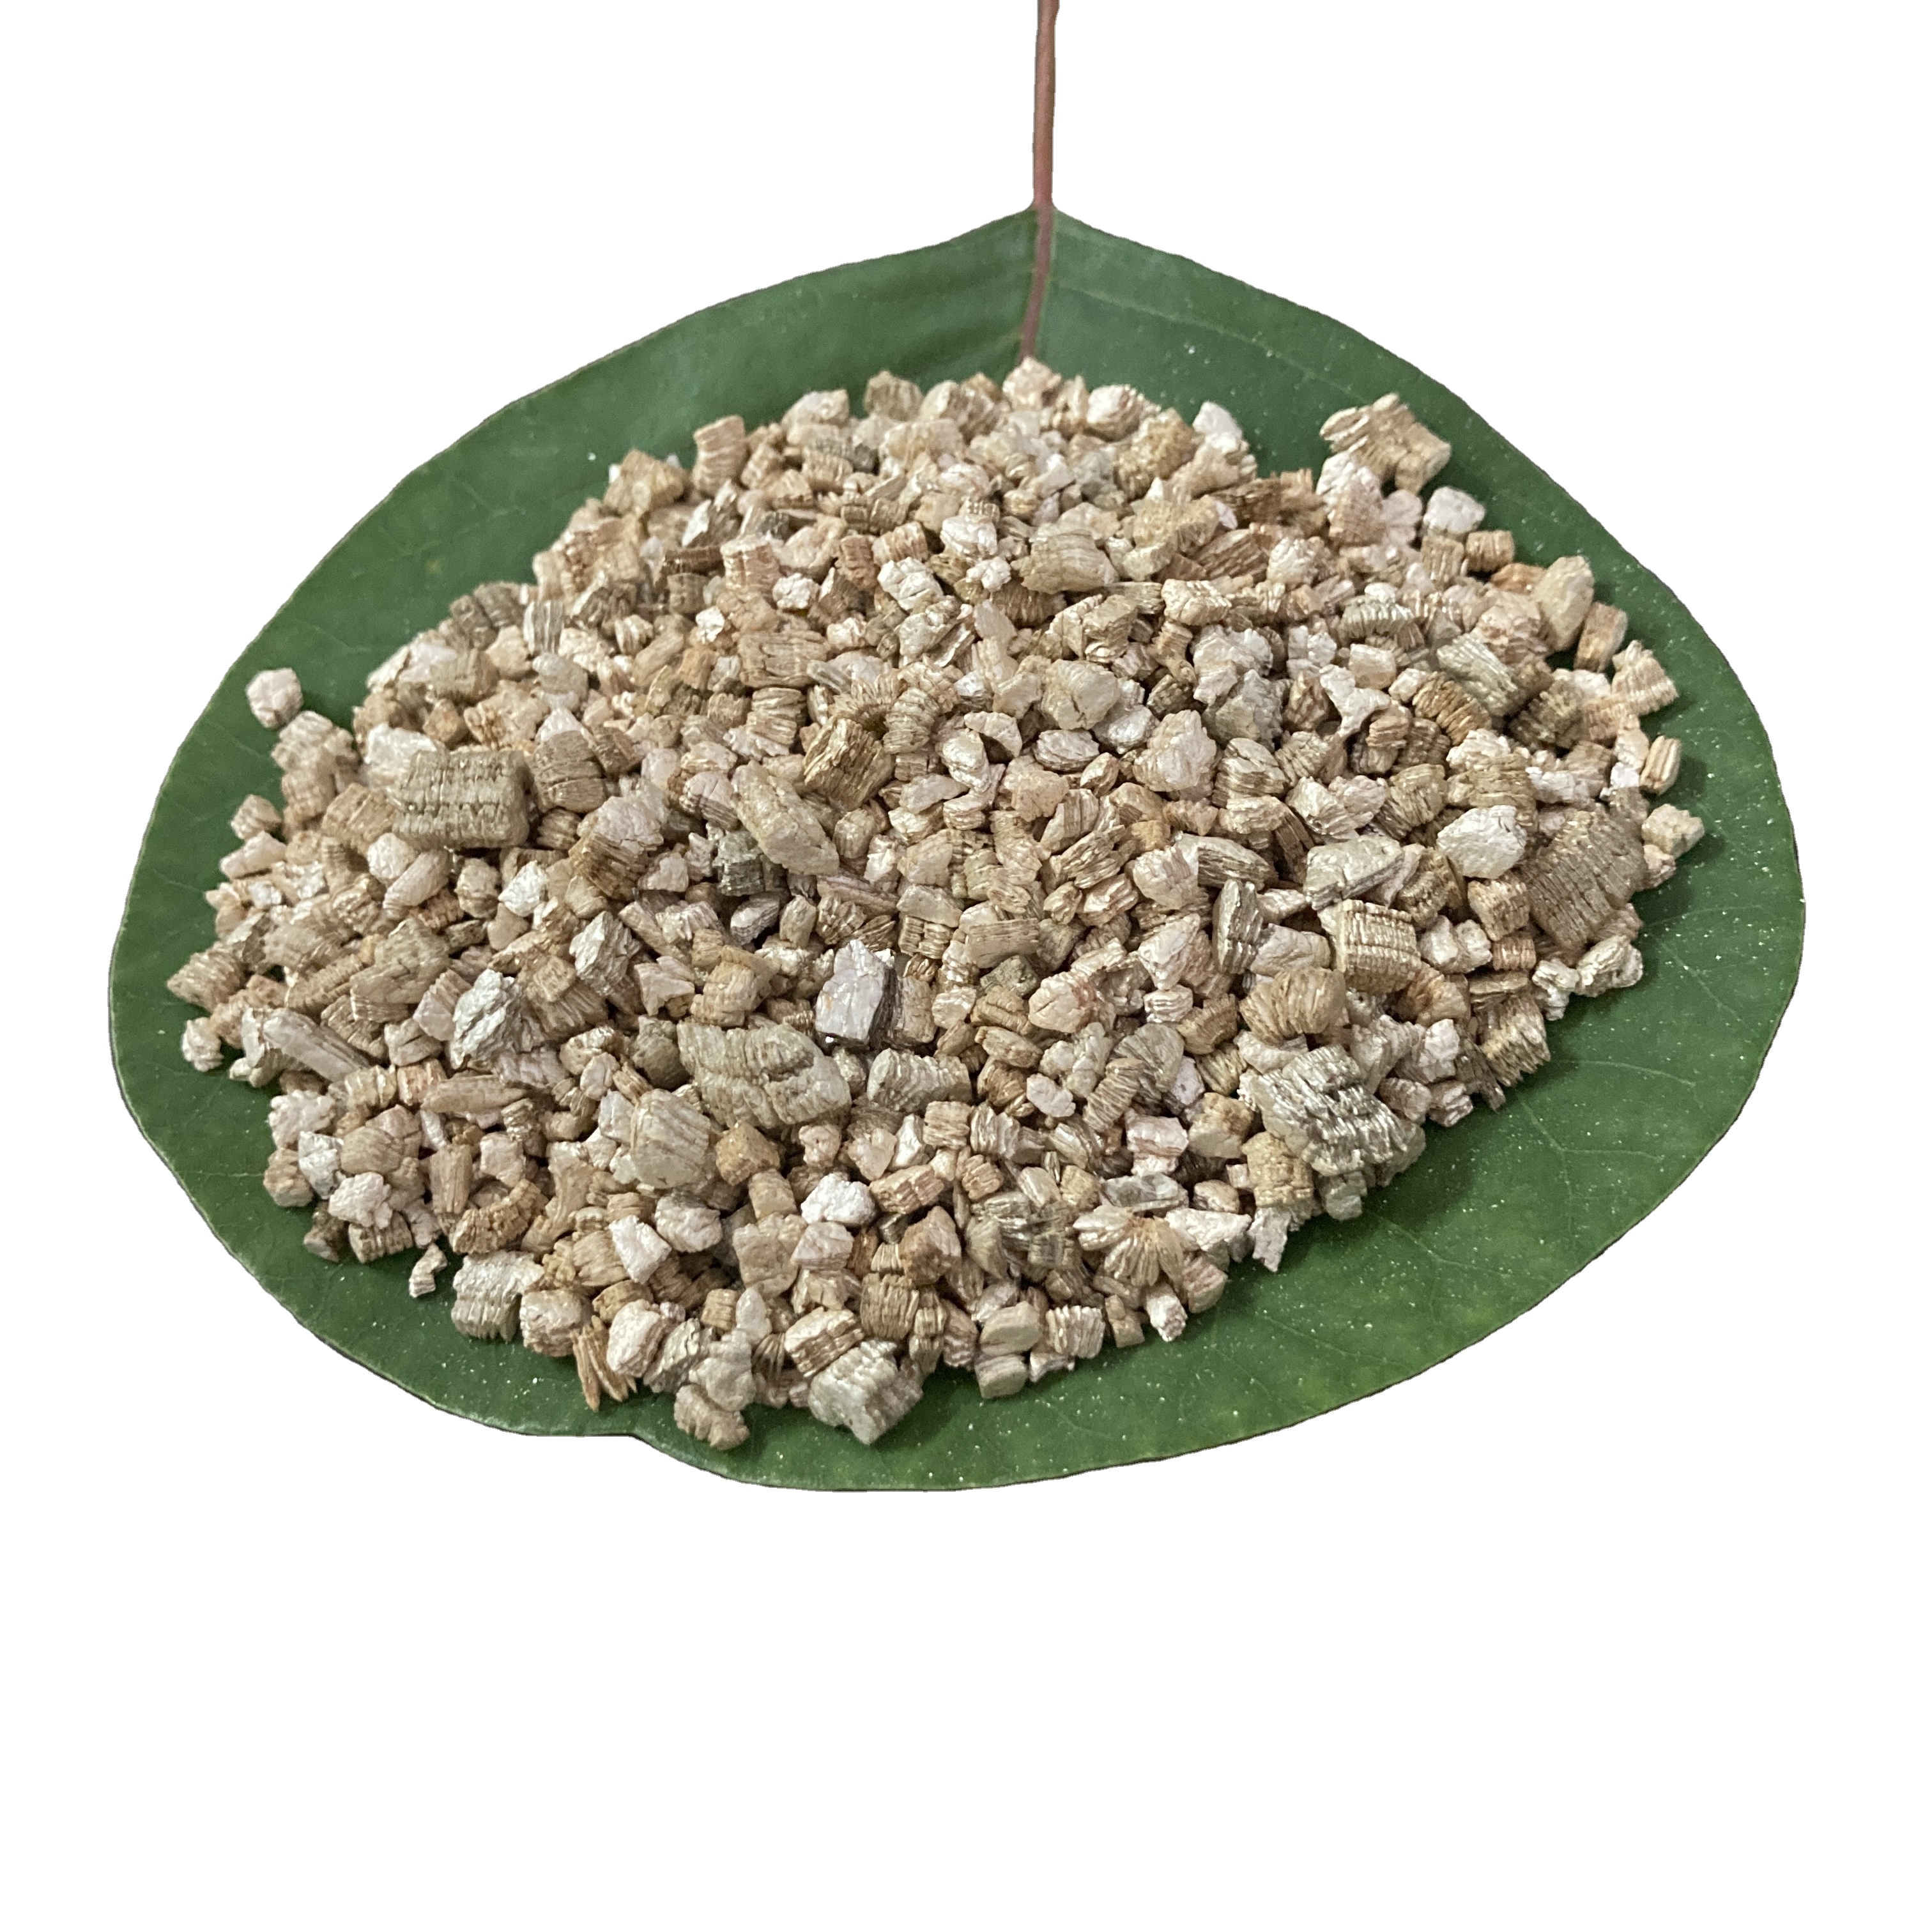 3-6mm golden expanded vermiculite for growing seedlings  Gold Expand Vermiculite Asbestos free for Plant growing